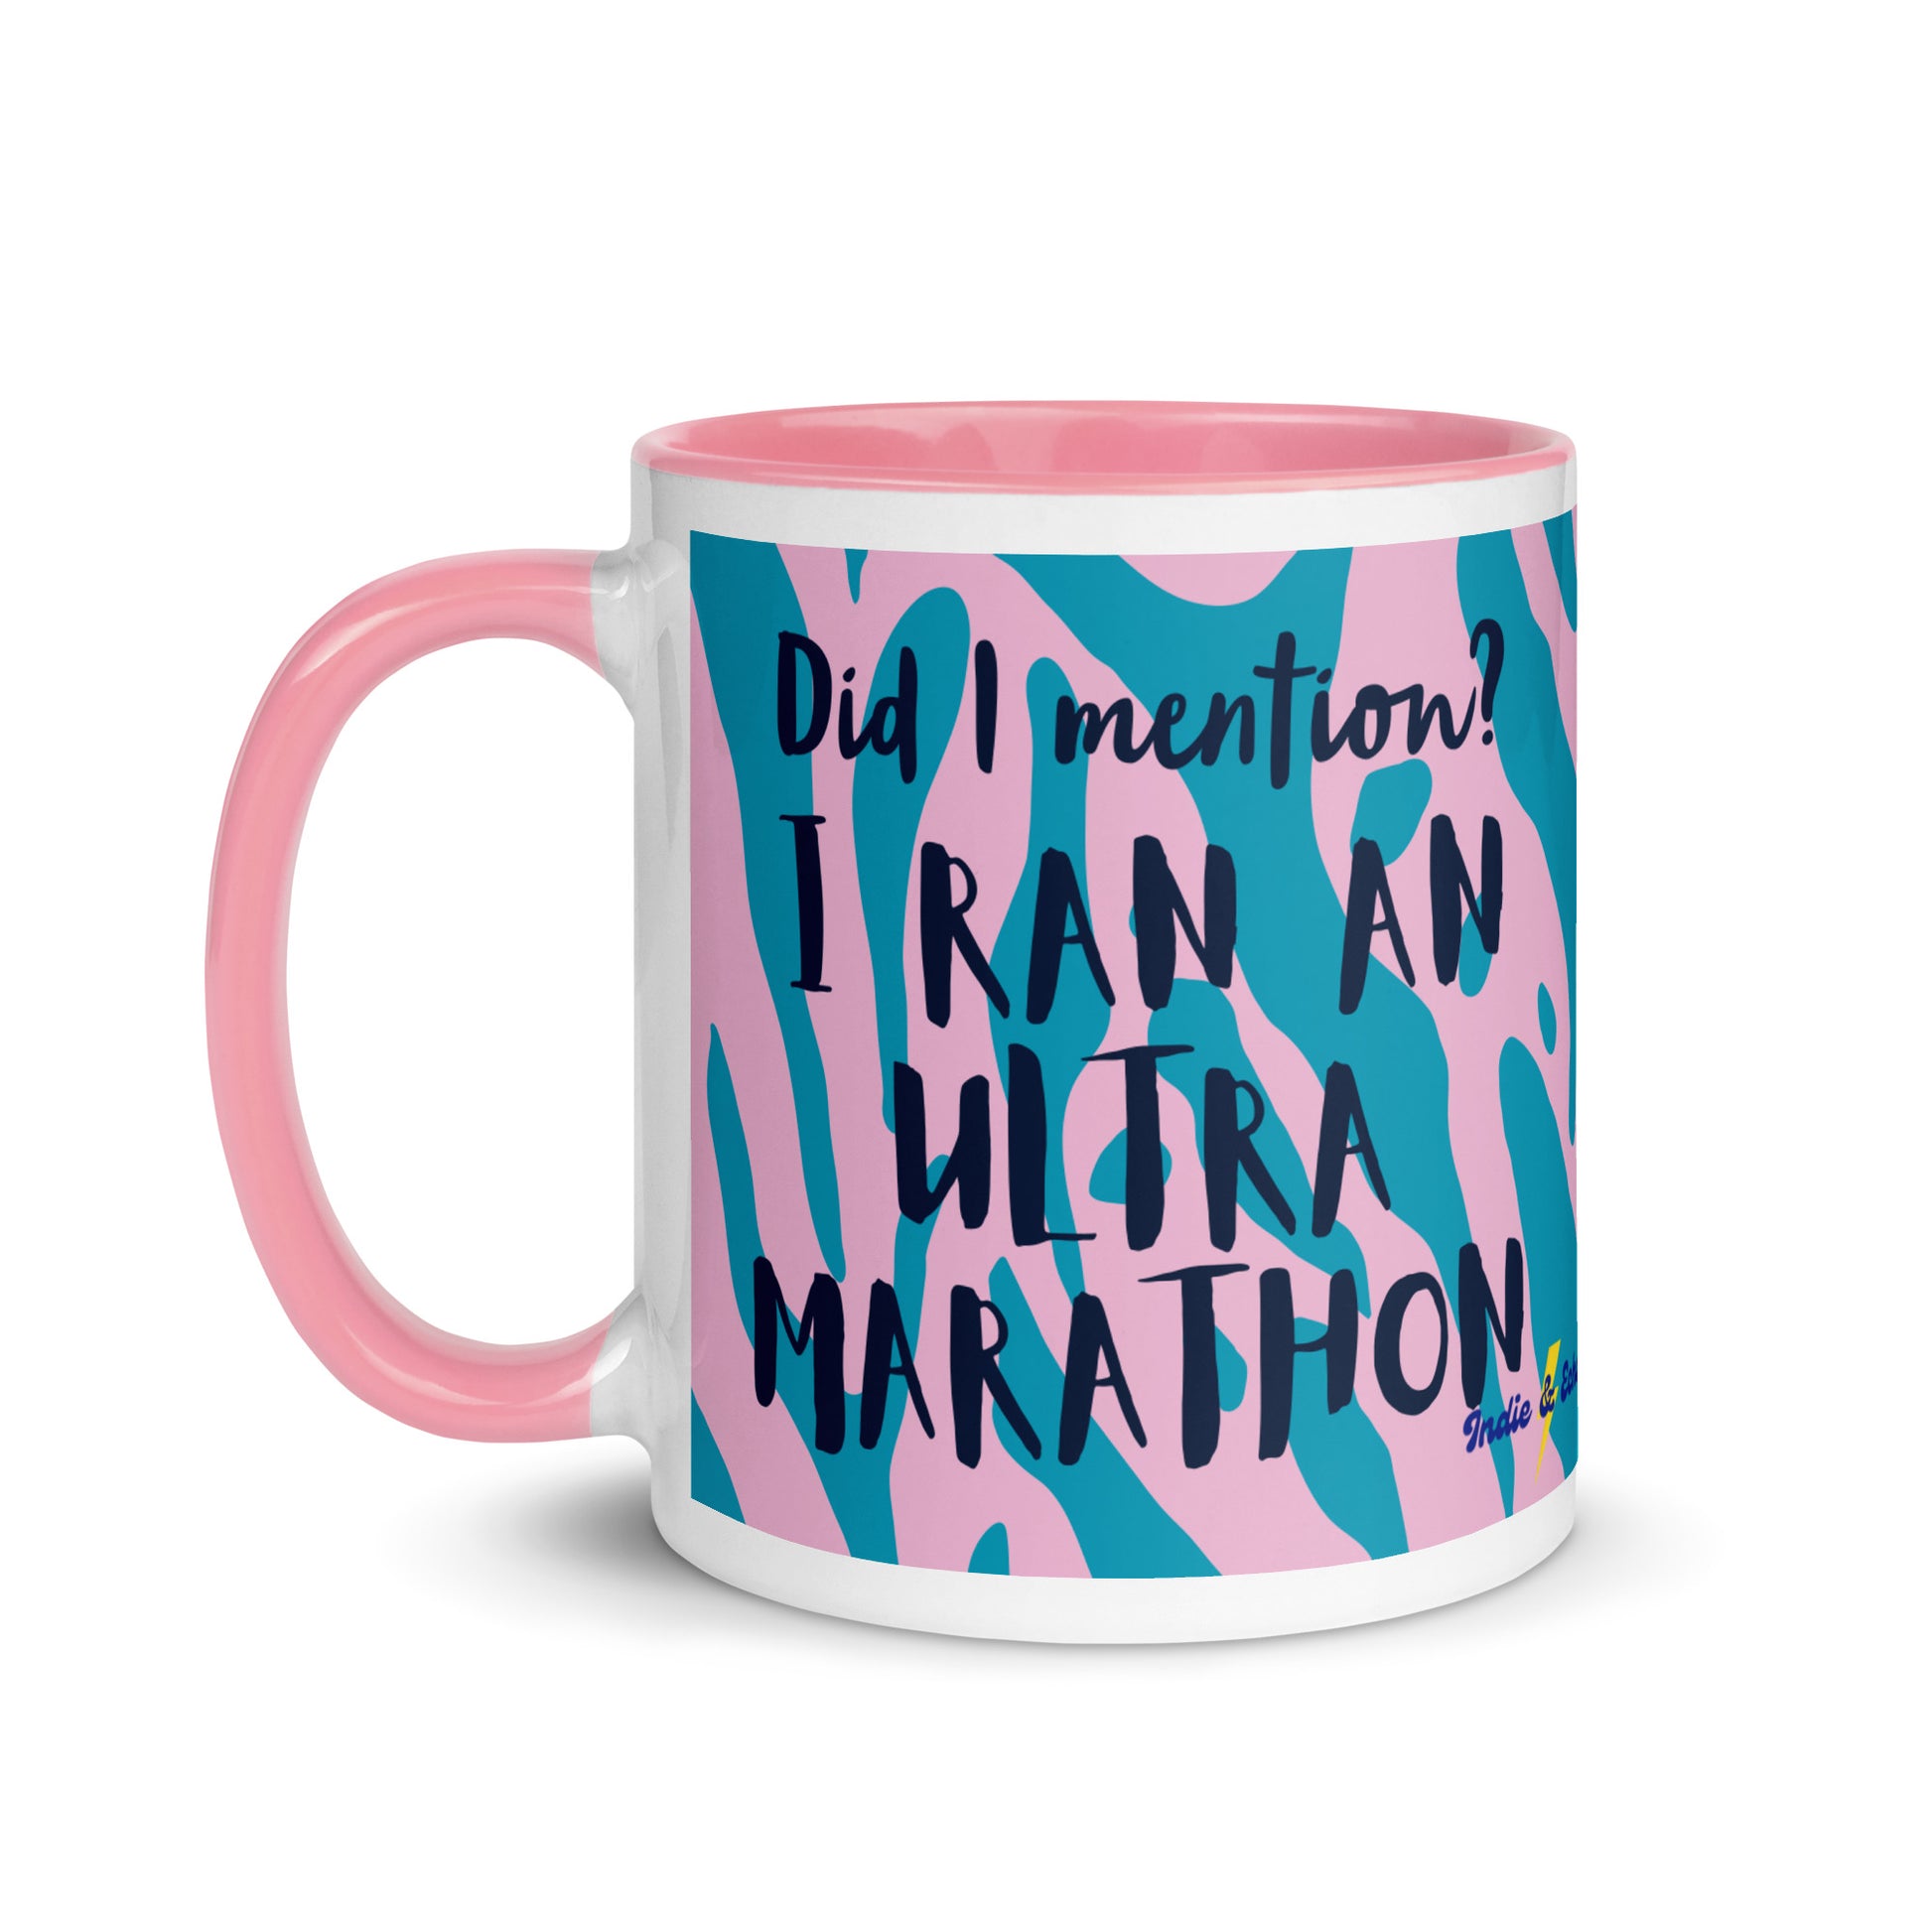 coffee mug with pink handle and rim, with the words did i mention? i ran an ultra marathon. a gift for people who have completed an ultra marathon